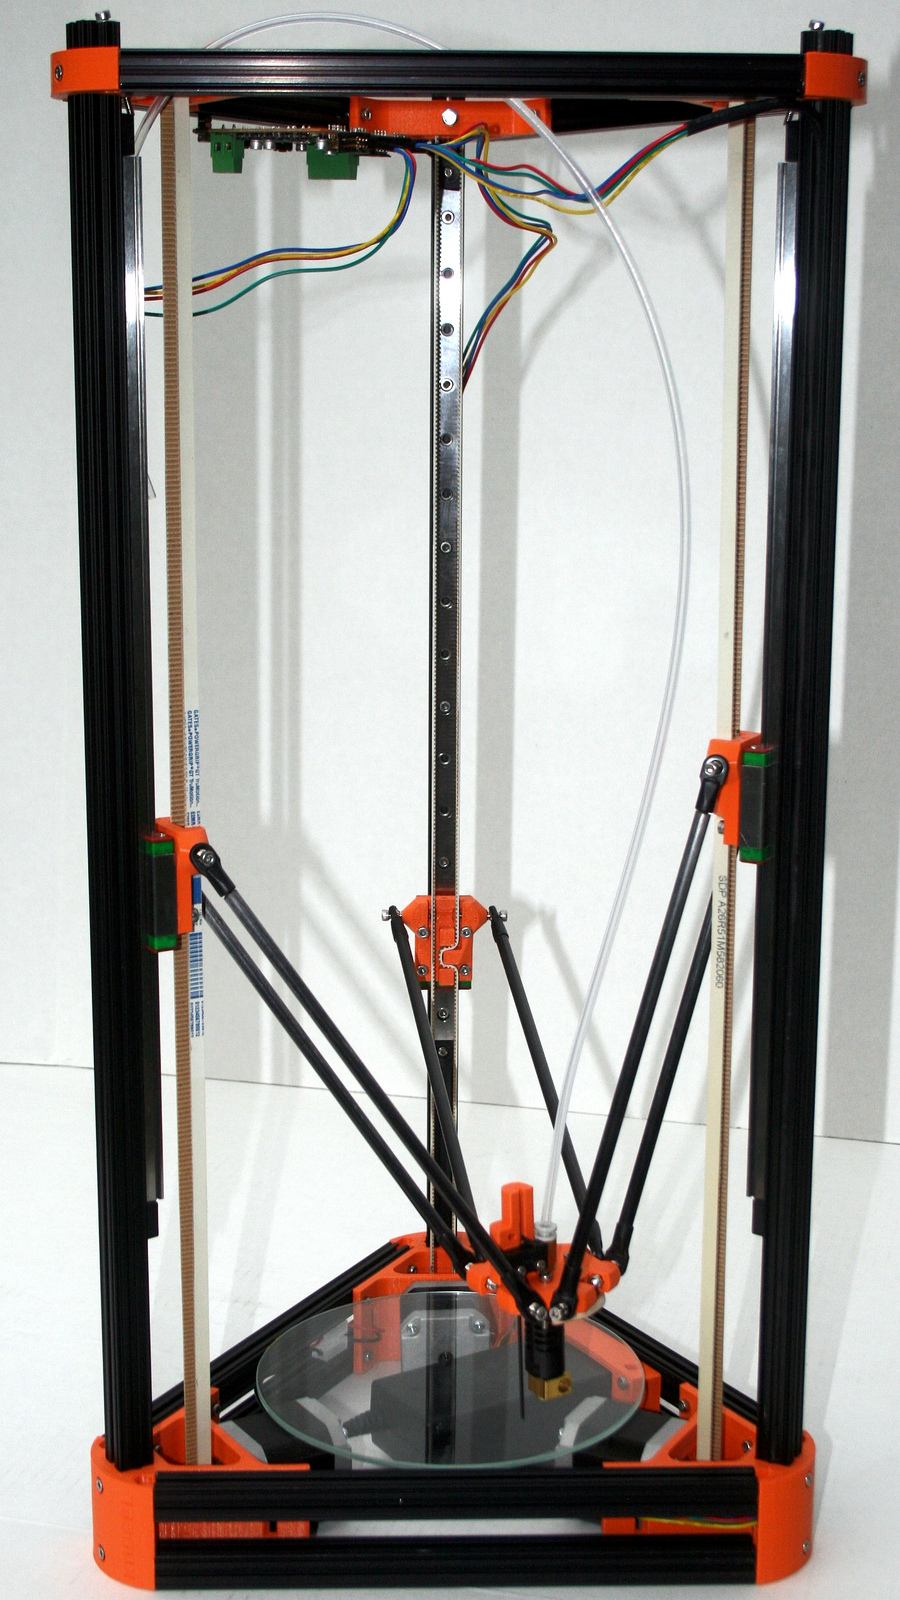 Kossel design: completely lacking in rigidity